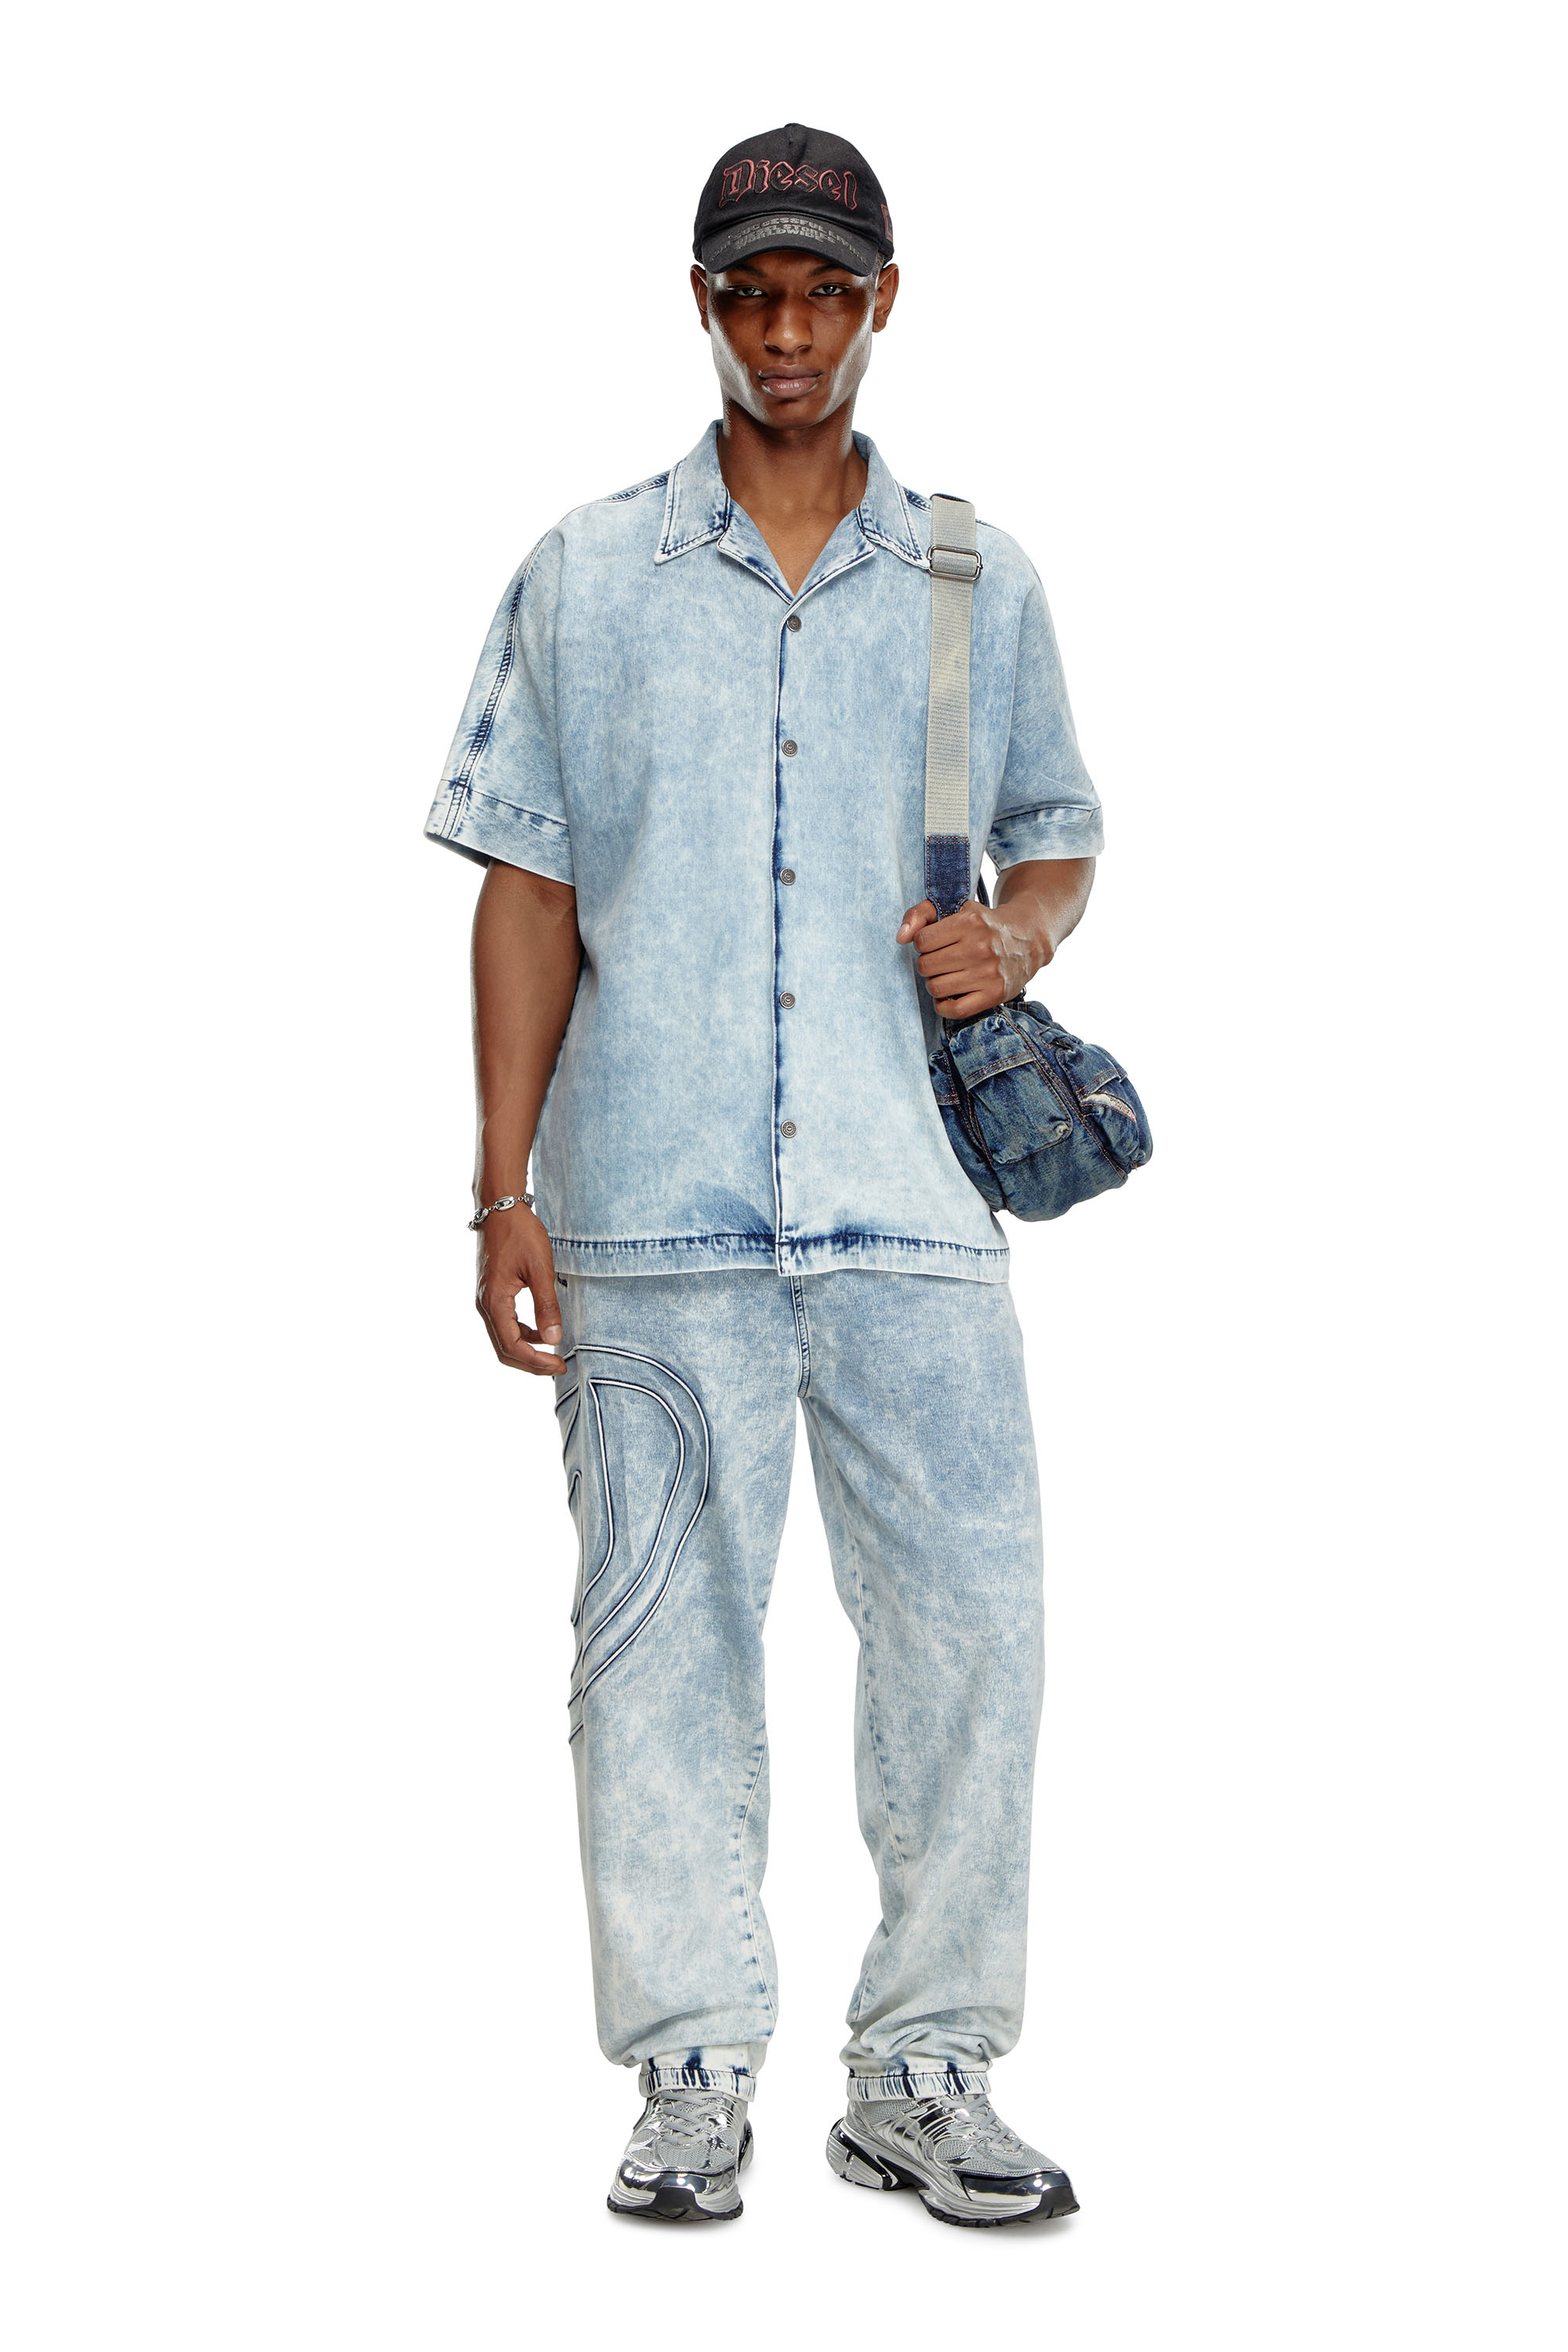 Diesel - D-NABIL-S, Man Denim bowling shirt with Oval D in Blue - Image 4